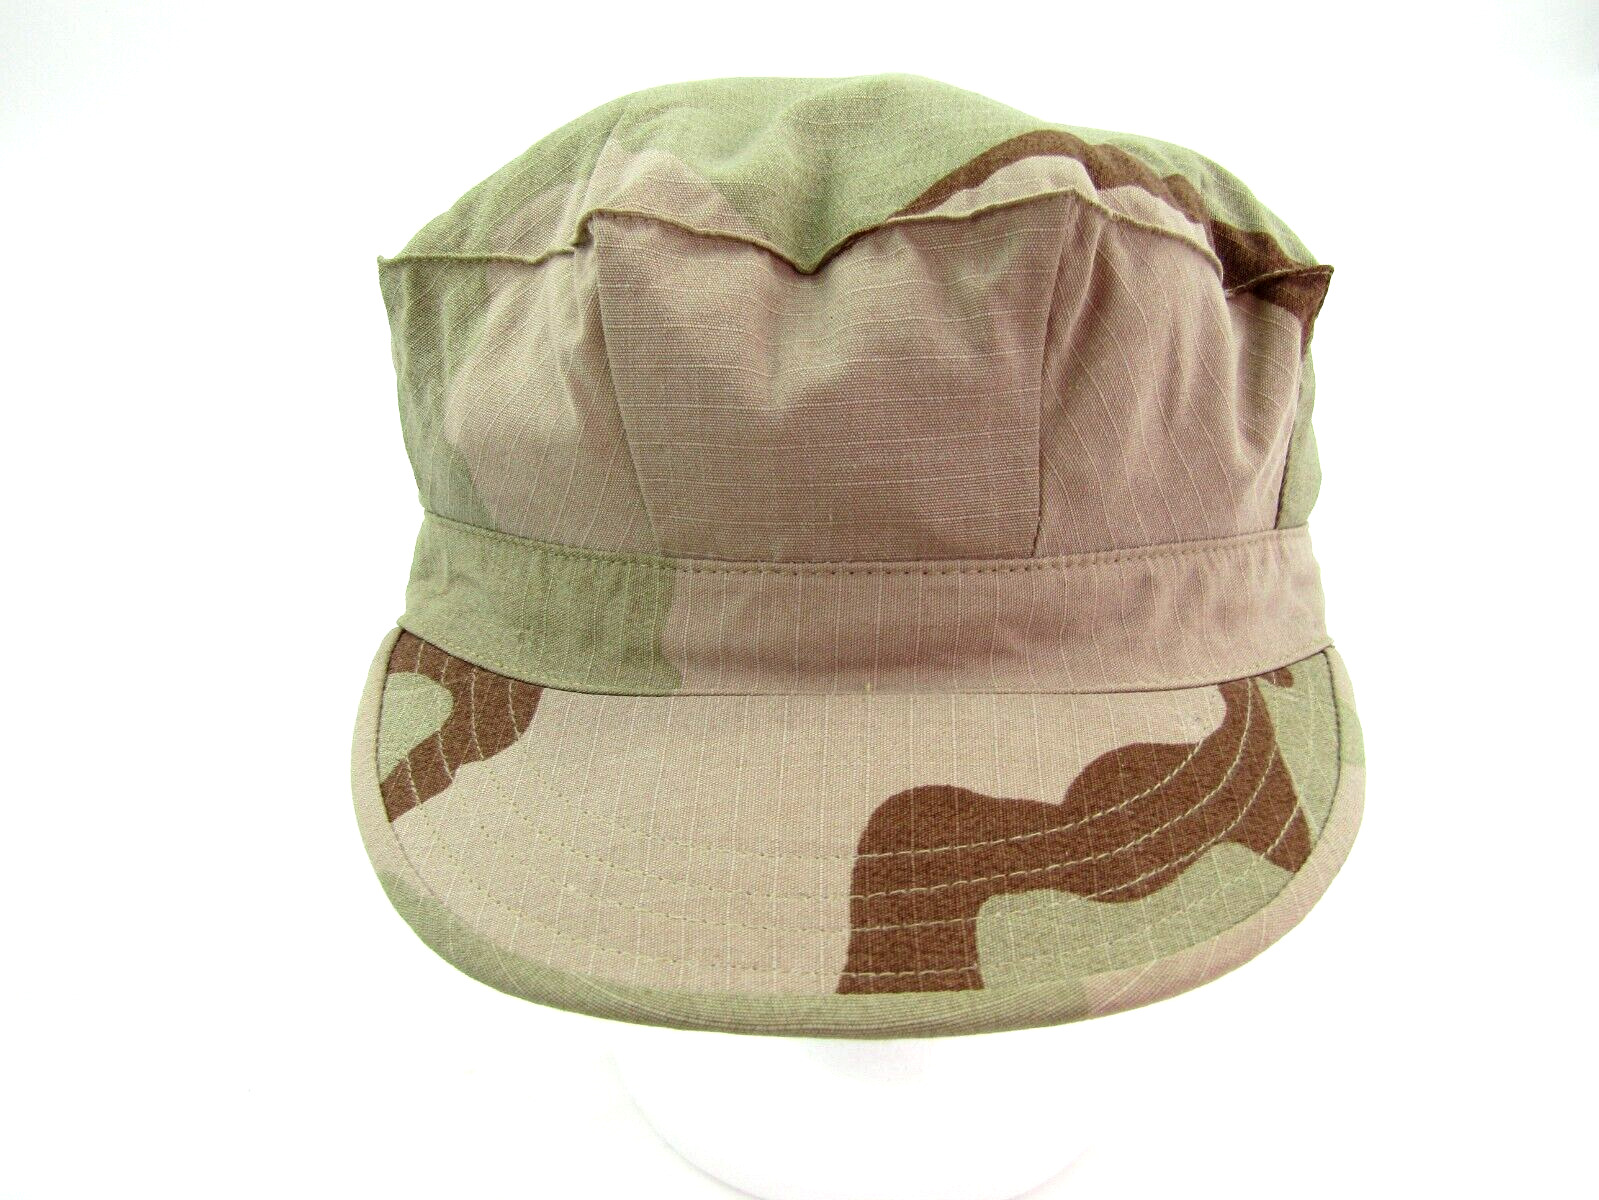 Military Army Camouflage Hat Cap Fitted No Size Listed Military Uniform Hat